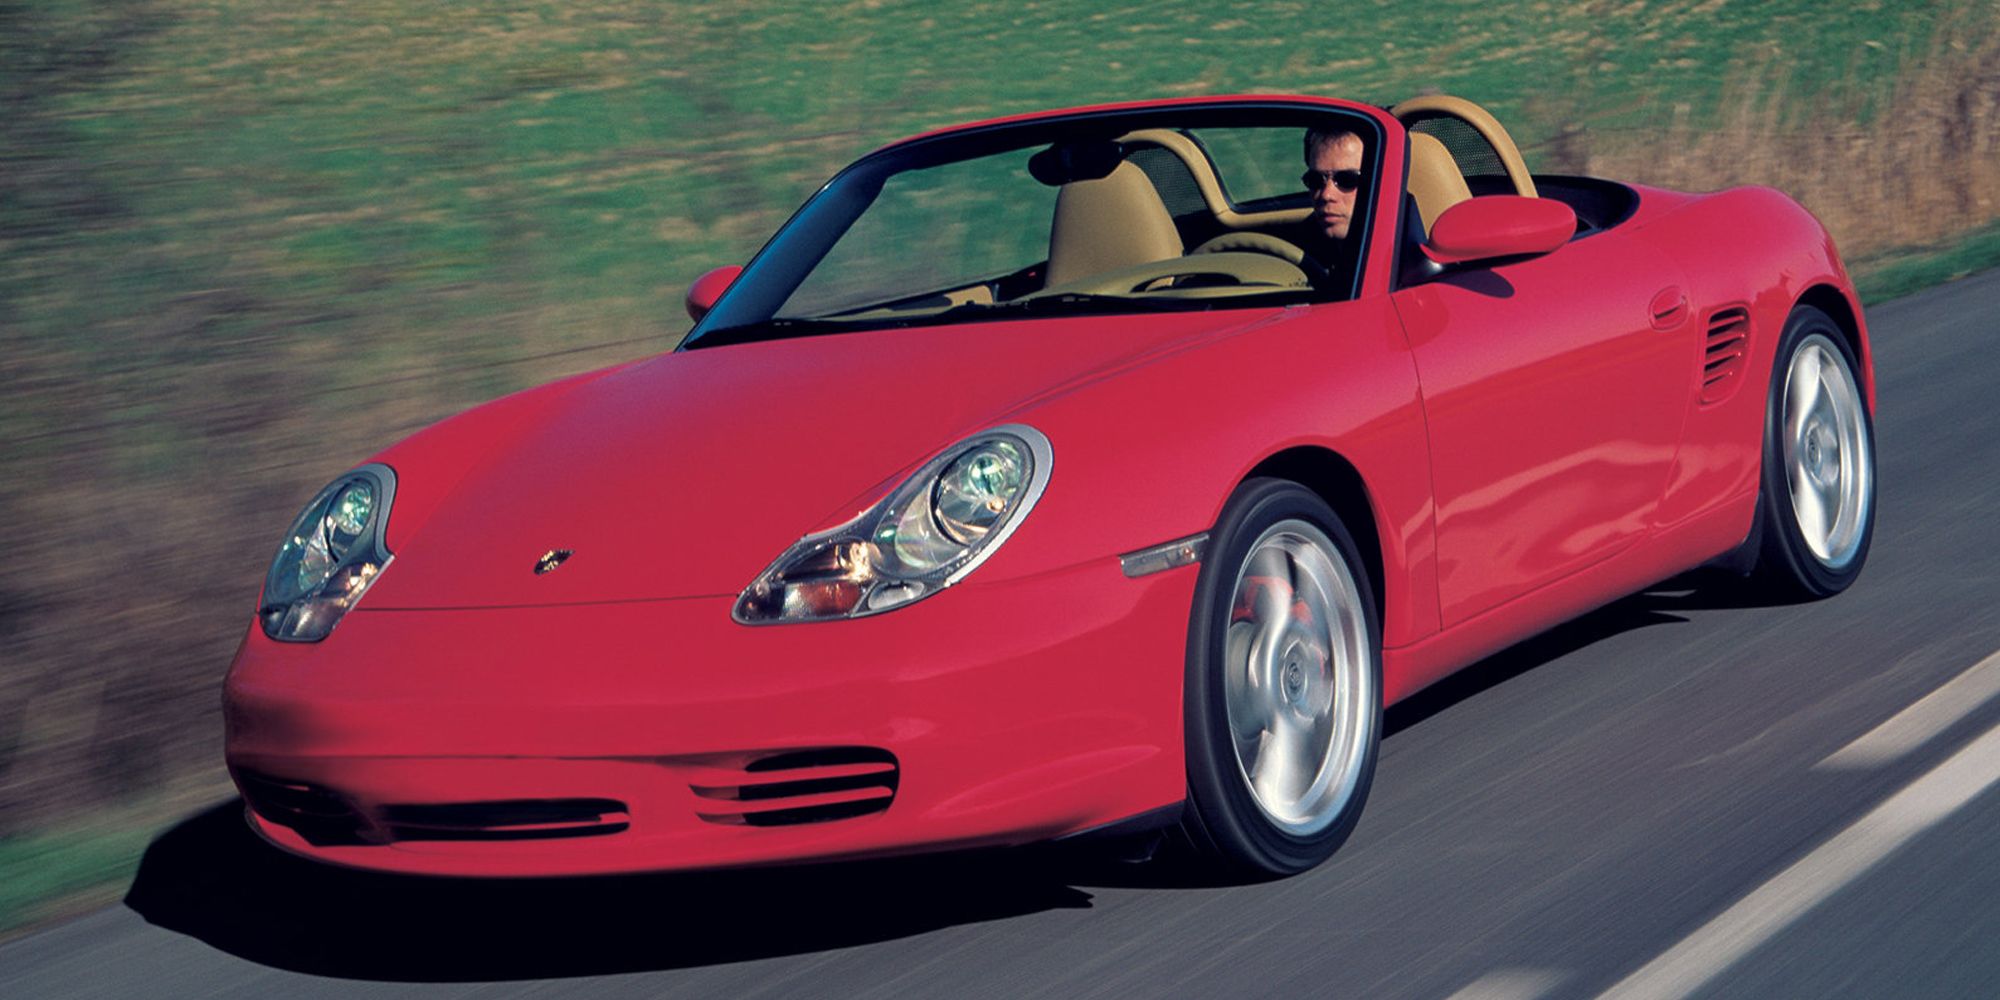 Front 3/4 view of a red Boxster on the move